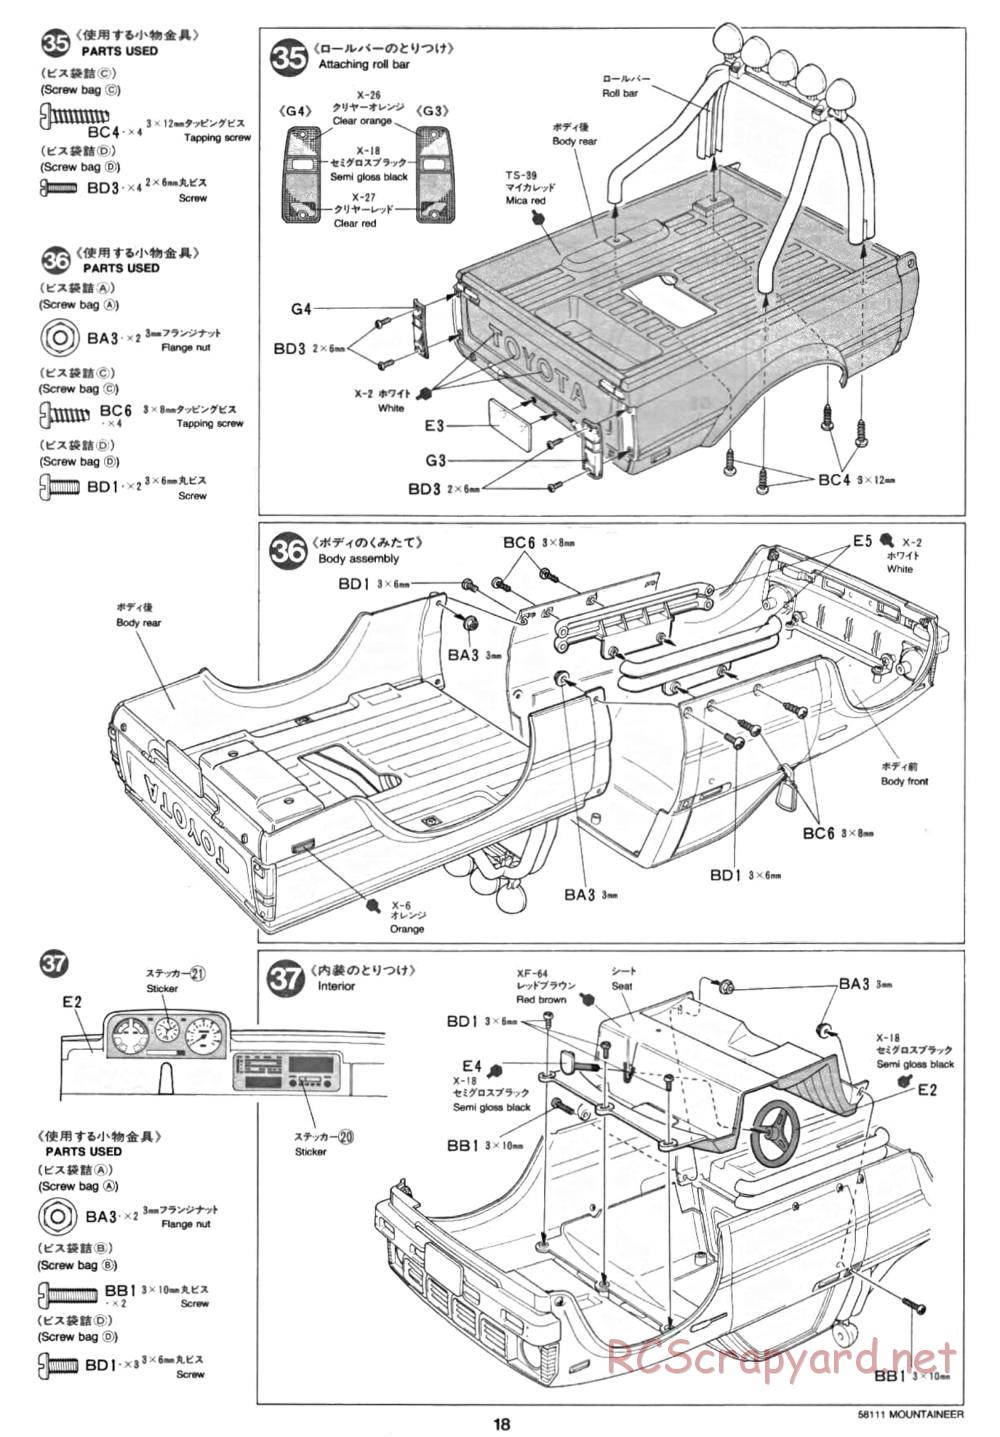 Tamiya - Toyota 4x4 Pick Up Mountaineer Chassis - Manual - Page 18